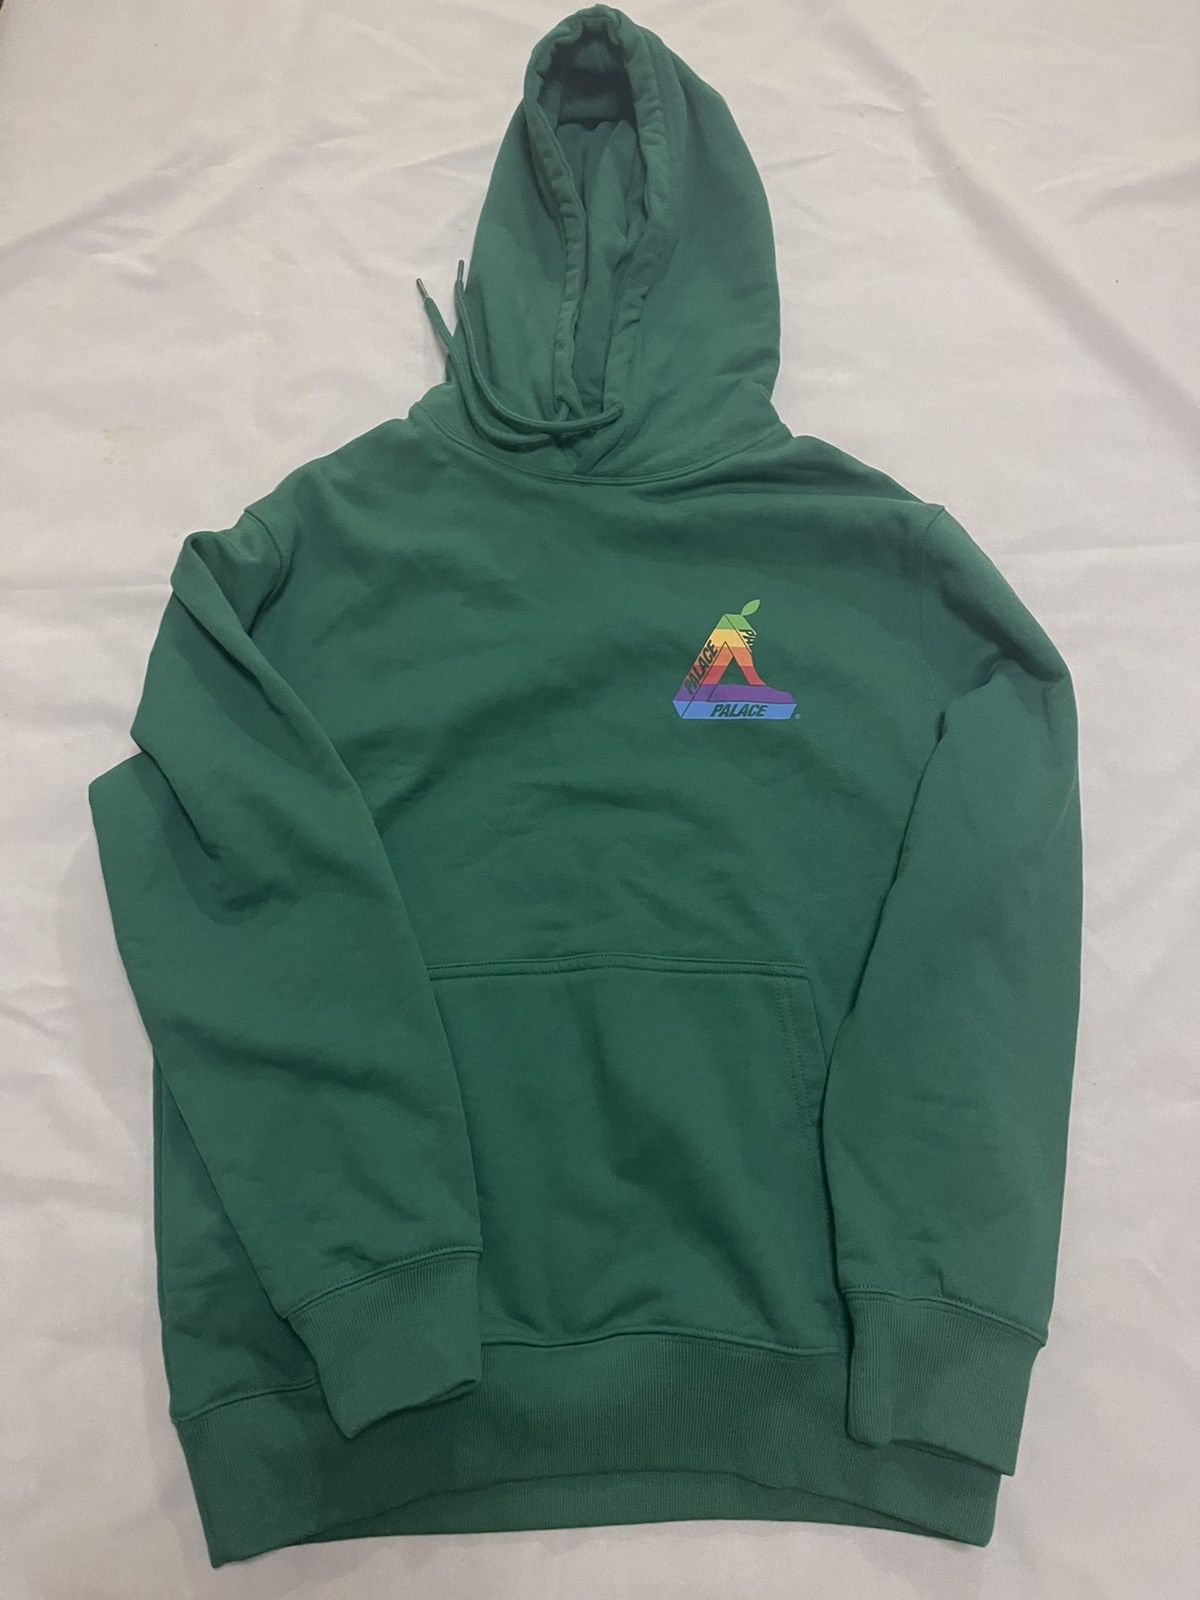 Palace Palace jobsworth hood Green | Grailed